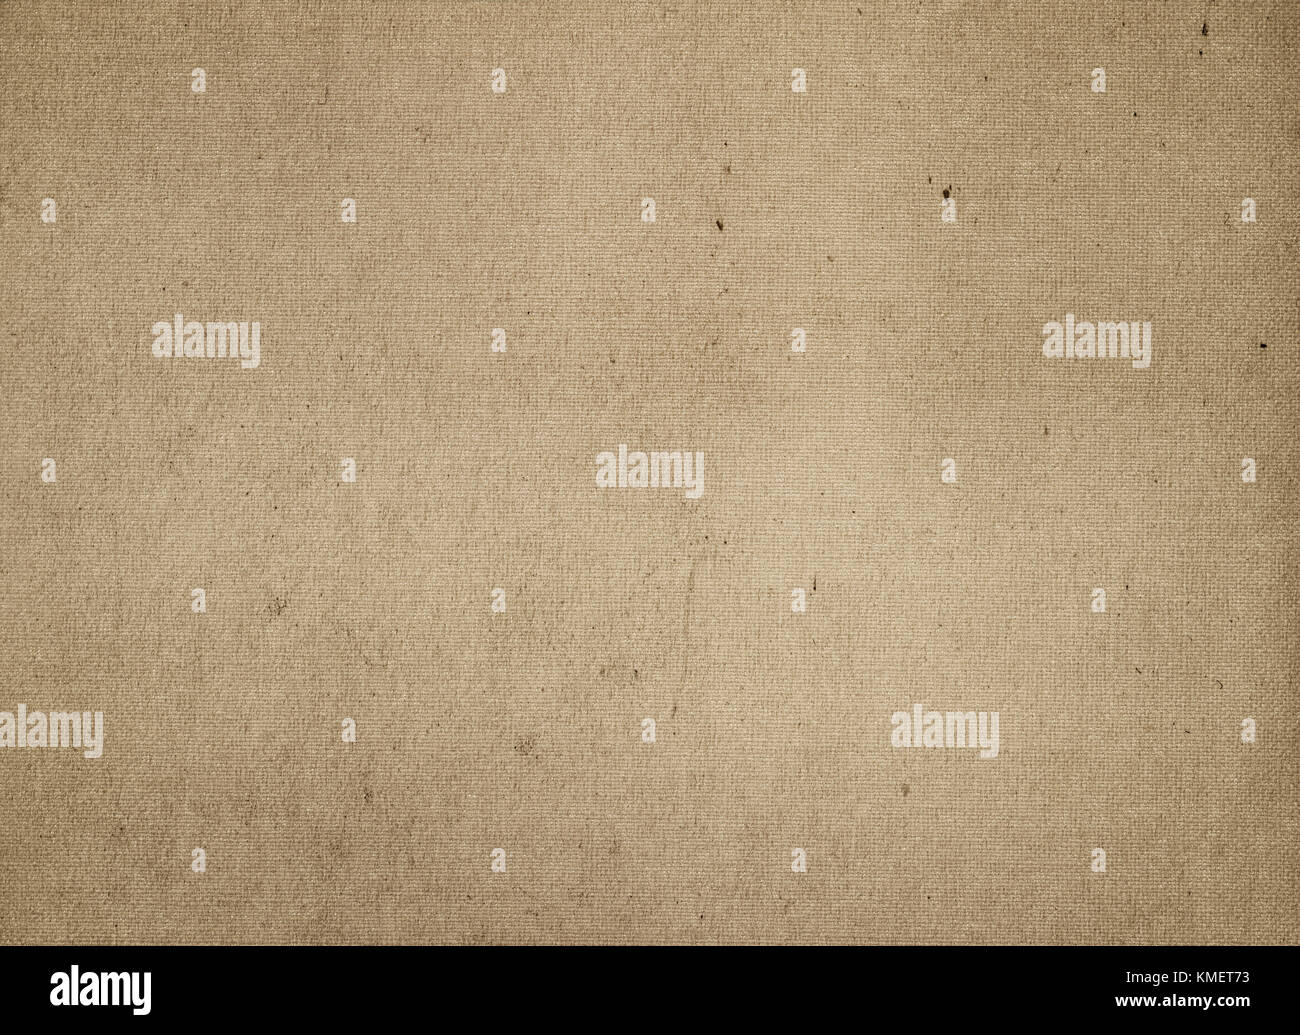 Dirty canvas texture or background for the design. Natural linen material. Stock Photo